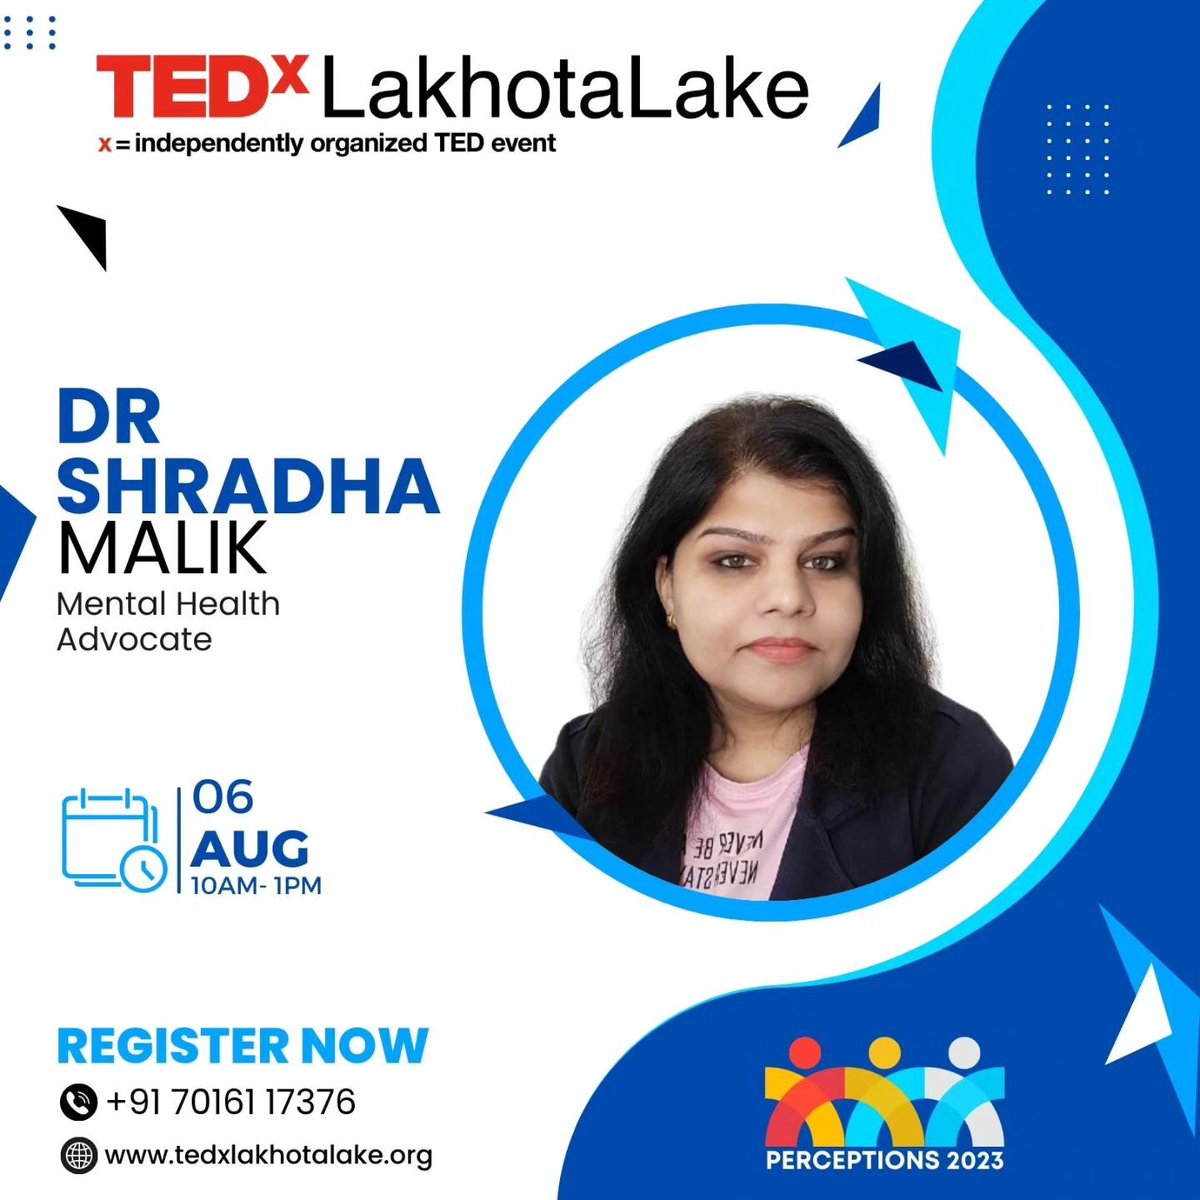 Watch, Listen & Meet 𝐃𝐫. 𝐒𝐡𝐫𝐚𝐝𝐡𝐚 𝐌𝐚𝐥𝐢𝐤 at #TEDxLakhotaLake 2023: PERCEPTIONS!

#TED #TEDx #Perceptions #Speakers #SpeakerAlert #SpeakerAnnouncements #jamnagar #AthenaBHS 

Grab Your Tickets Now!
townscript.com/e/tedxll-23